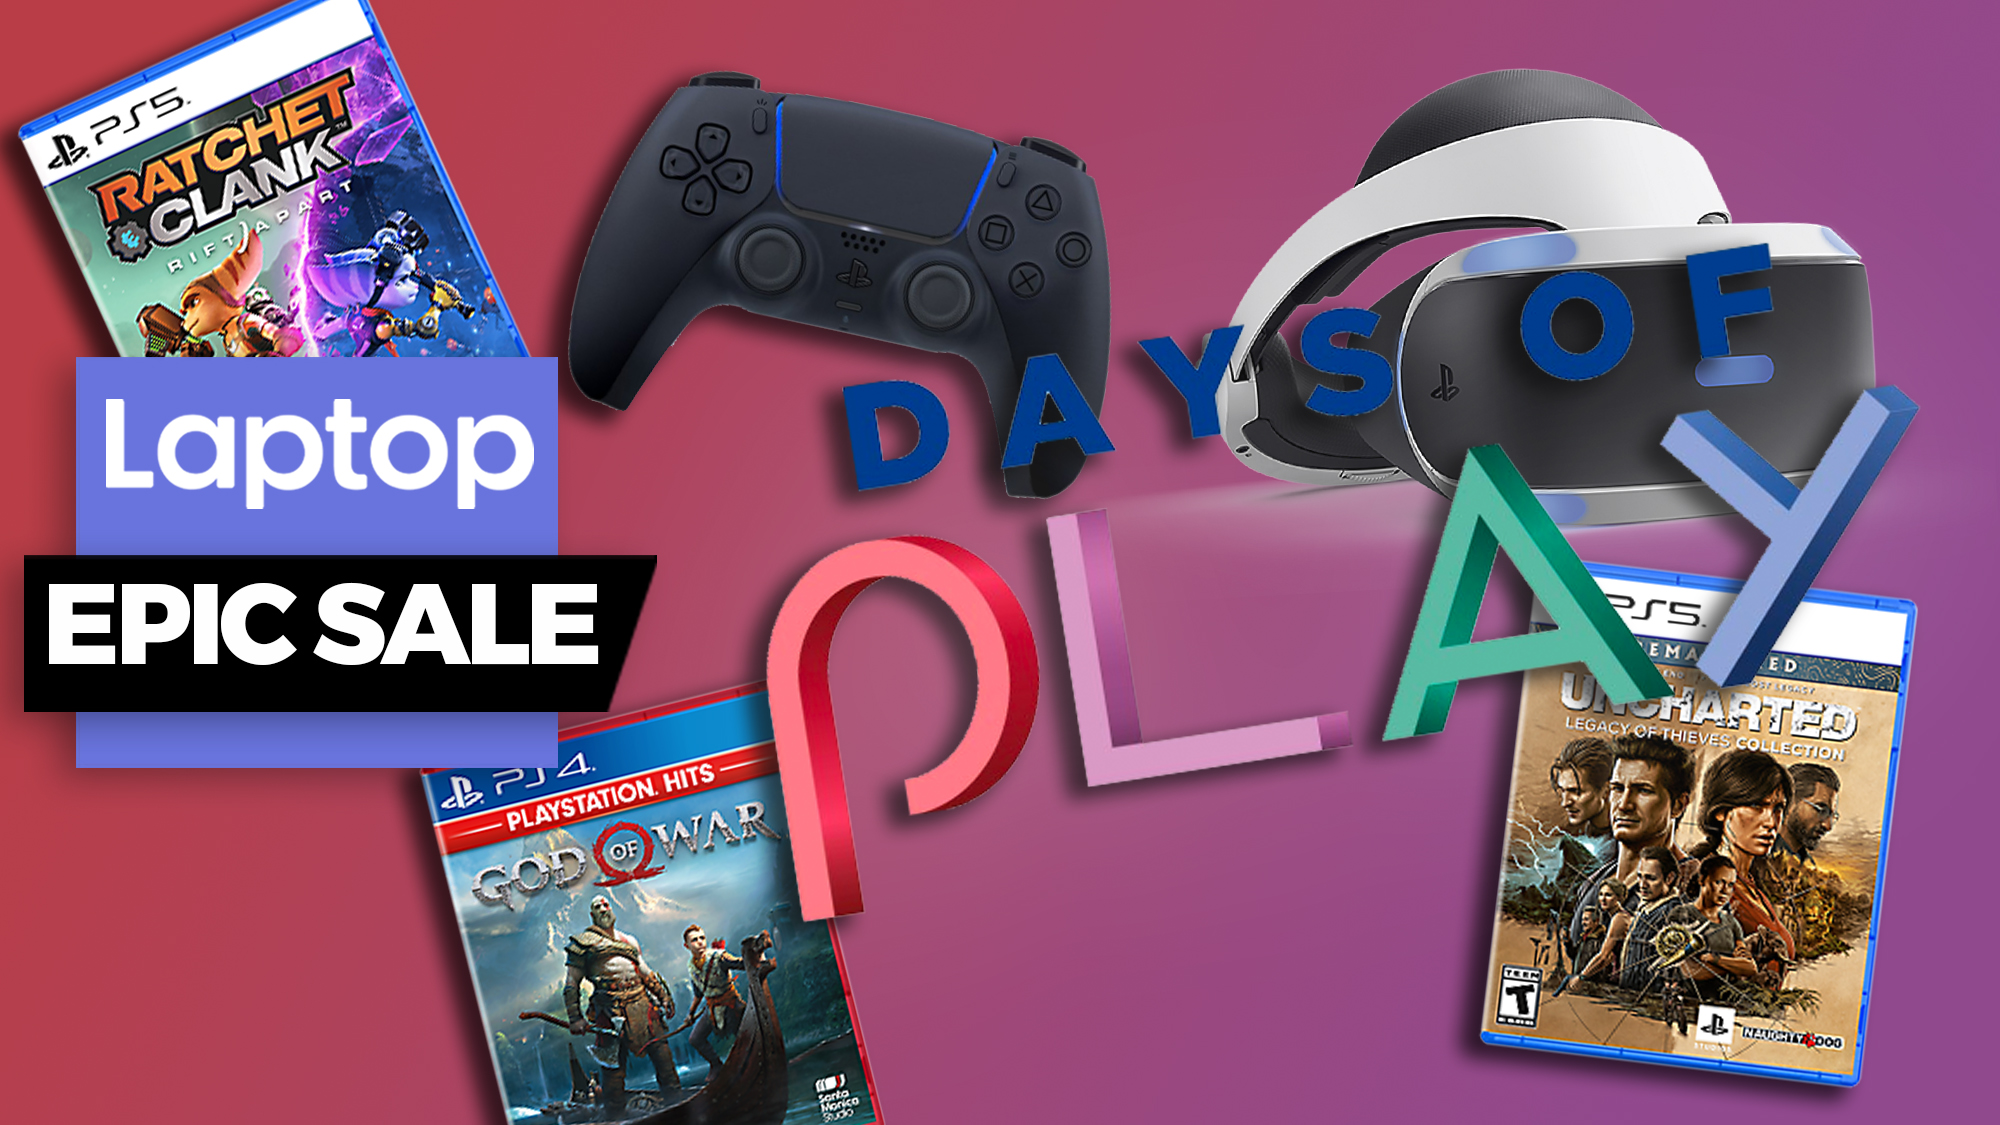 PlayStation's Days of Play sale - what's on offer